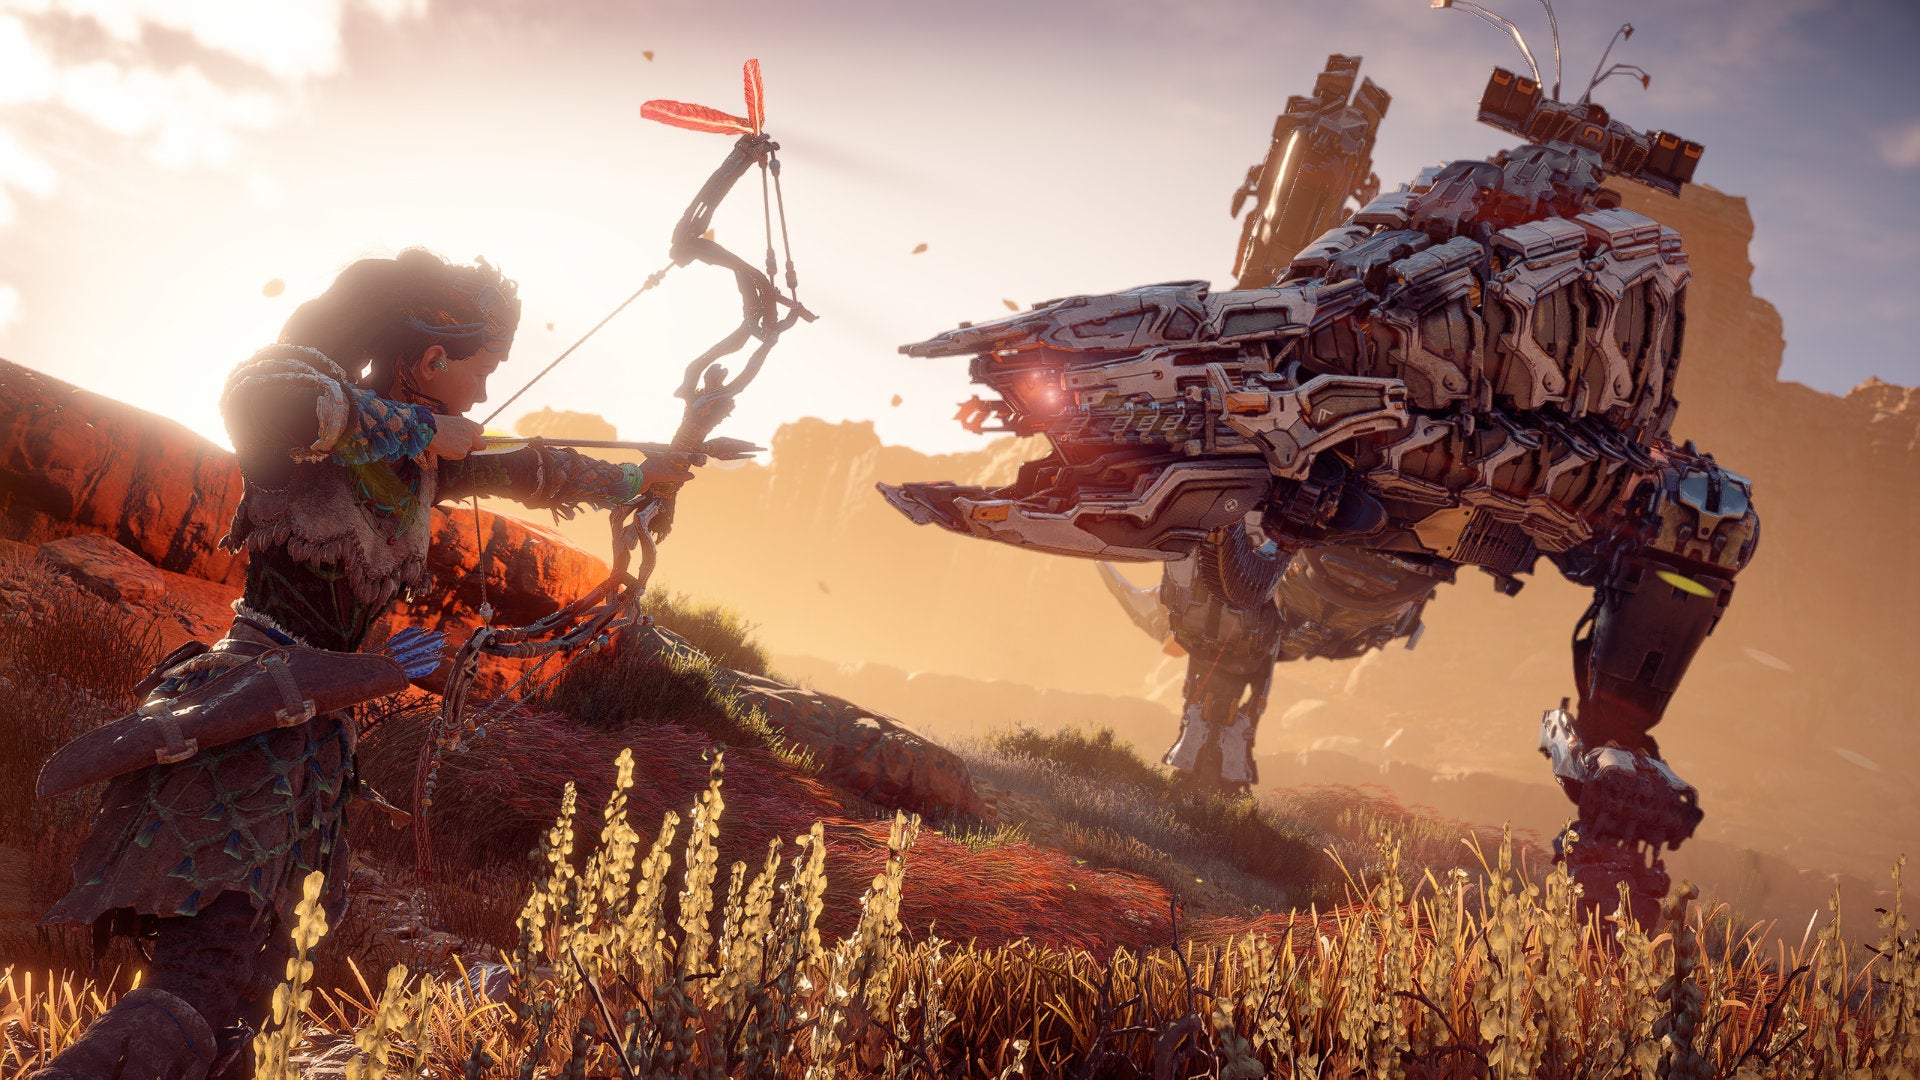 Aloy prepares to fire an arrow at the Thunderjaw bearing down on her in Horizon Zero Dawn.